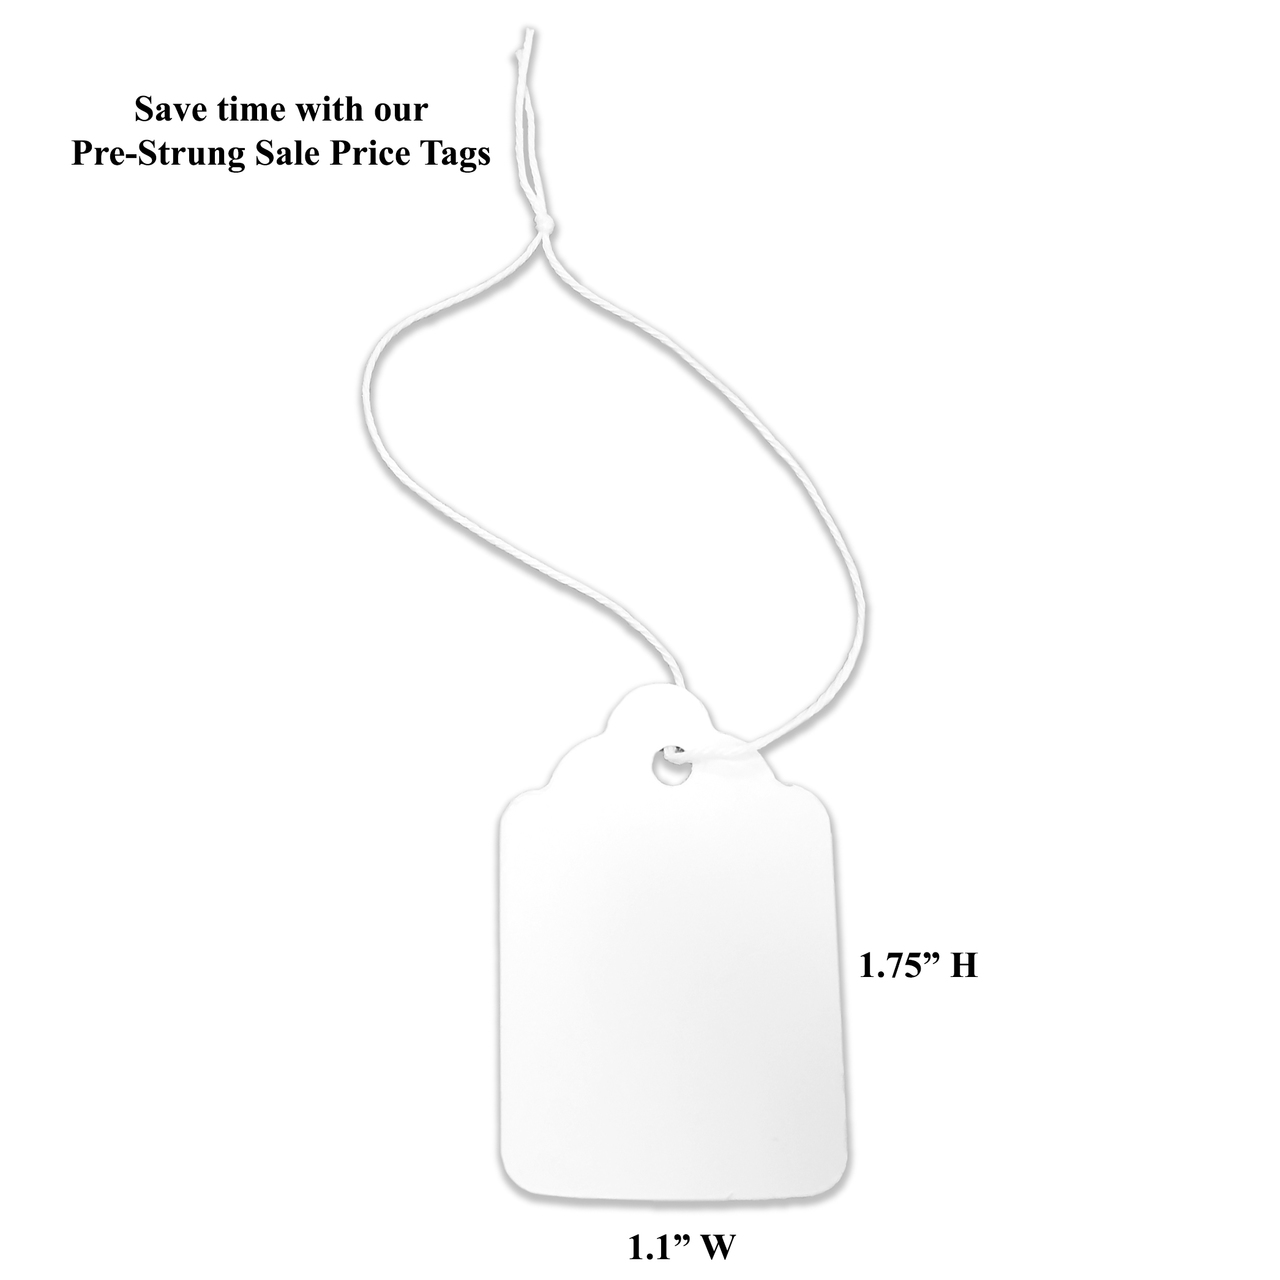 Blank Strung Merchandise Pricing Tags - Store Fixtures Direct